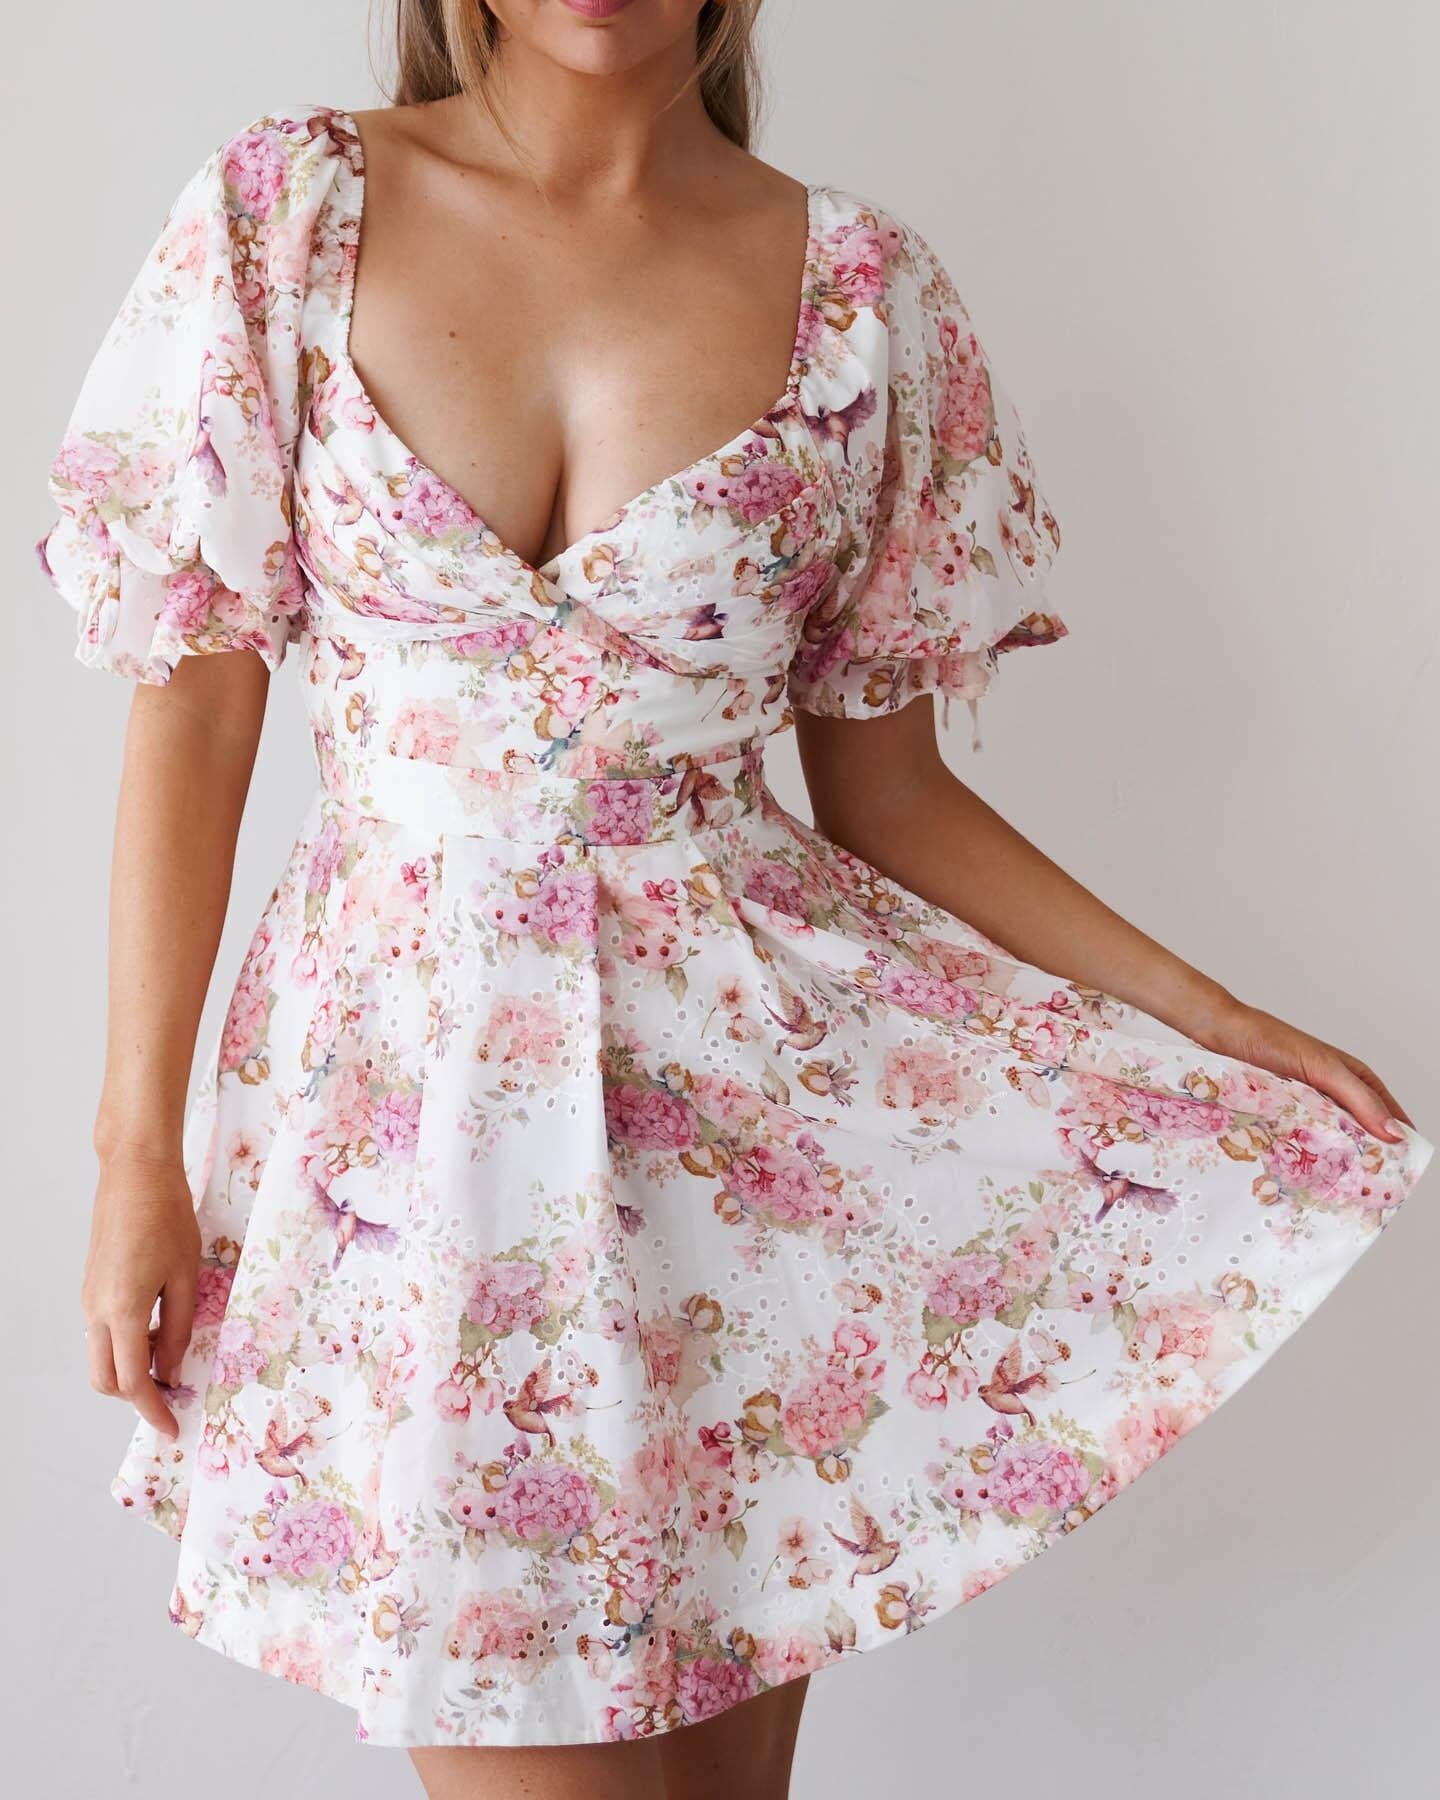 Antonia Dress-Pink Floral - Twosisters The Label